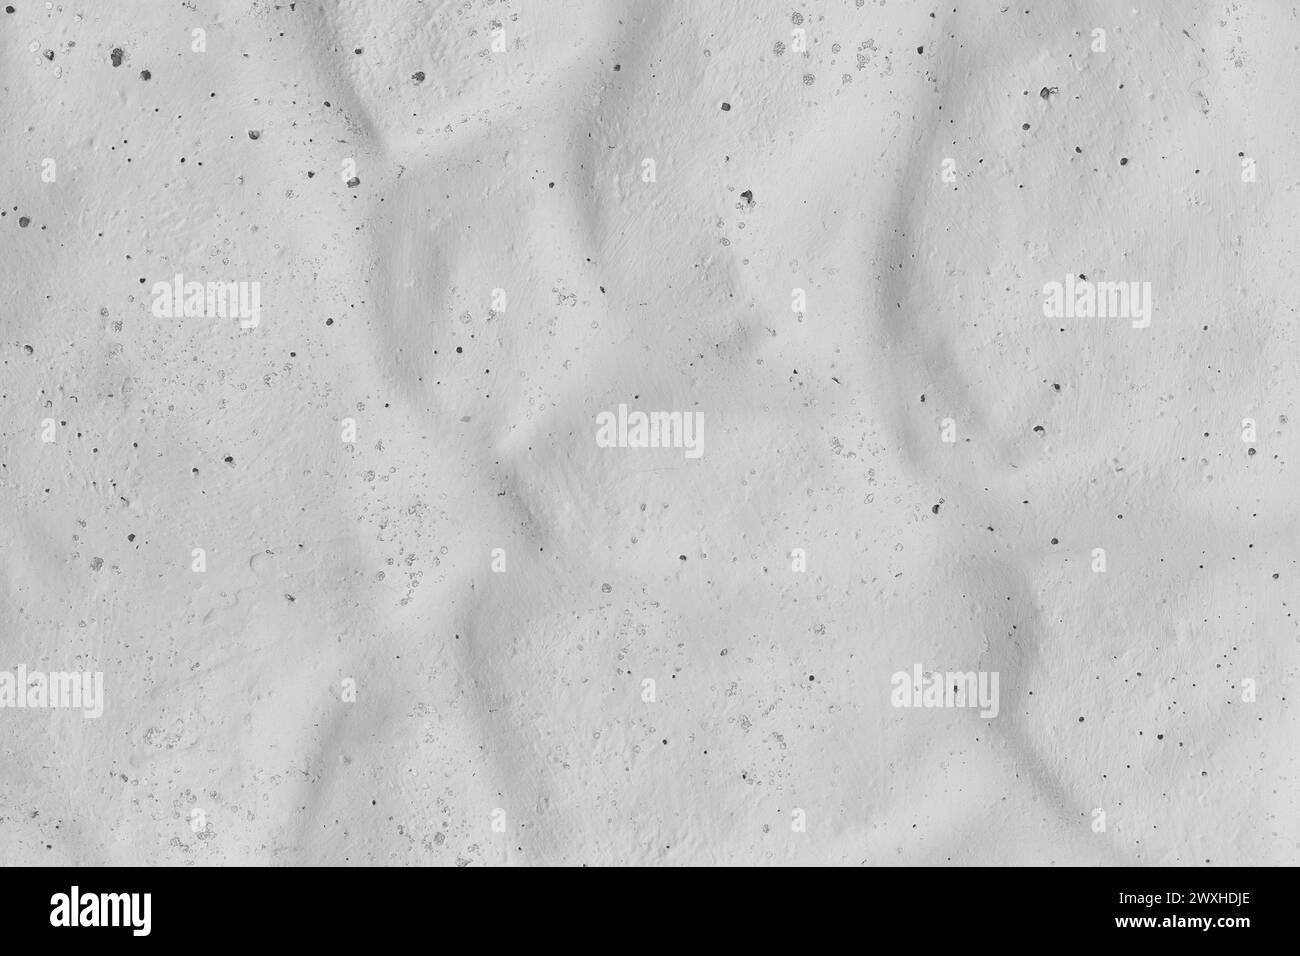 White paint old abstract dirty stone fence surface texture background pattern wall bright rough. Stock Photo